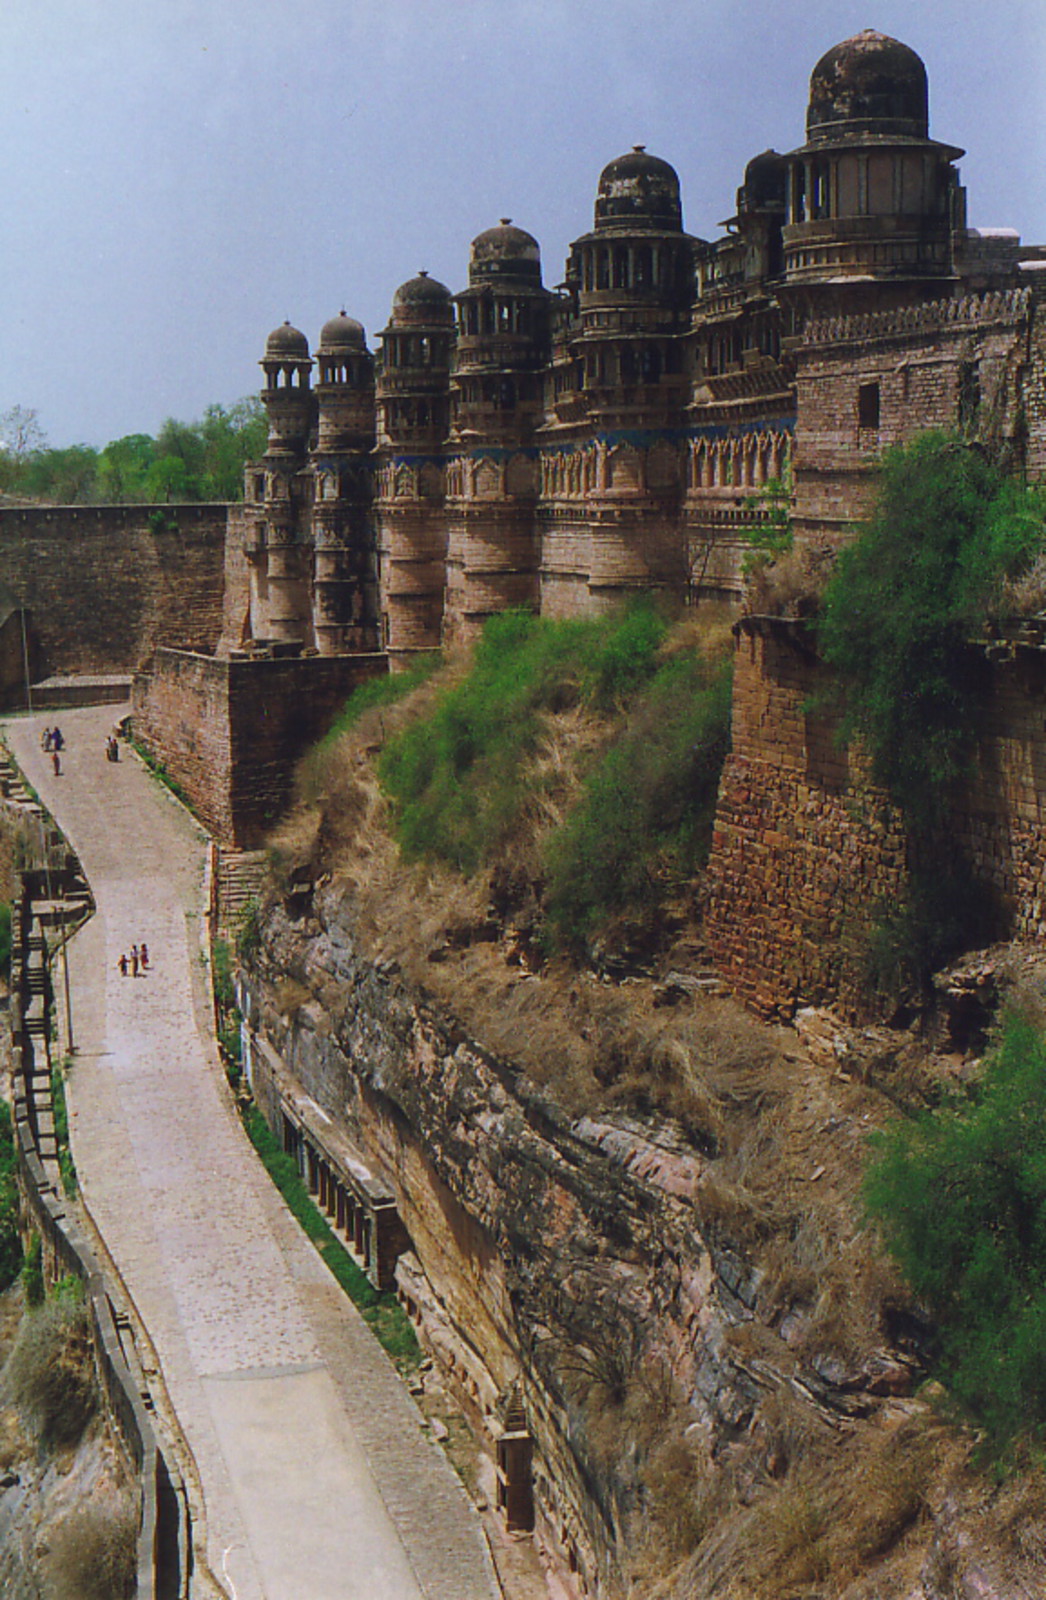 The Man Singh Palace on top of Gwalior's rock fortress